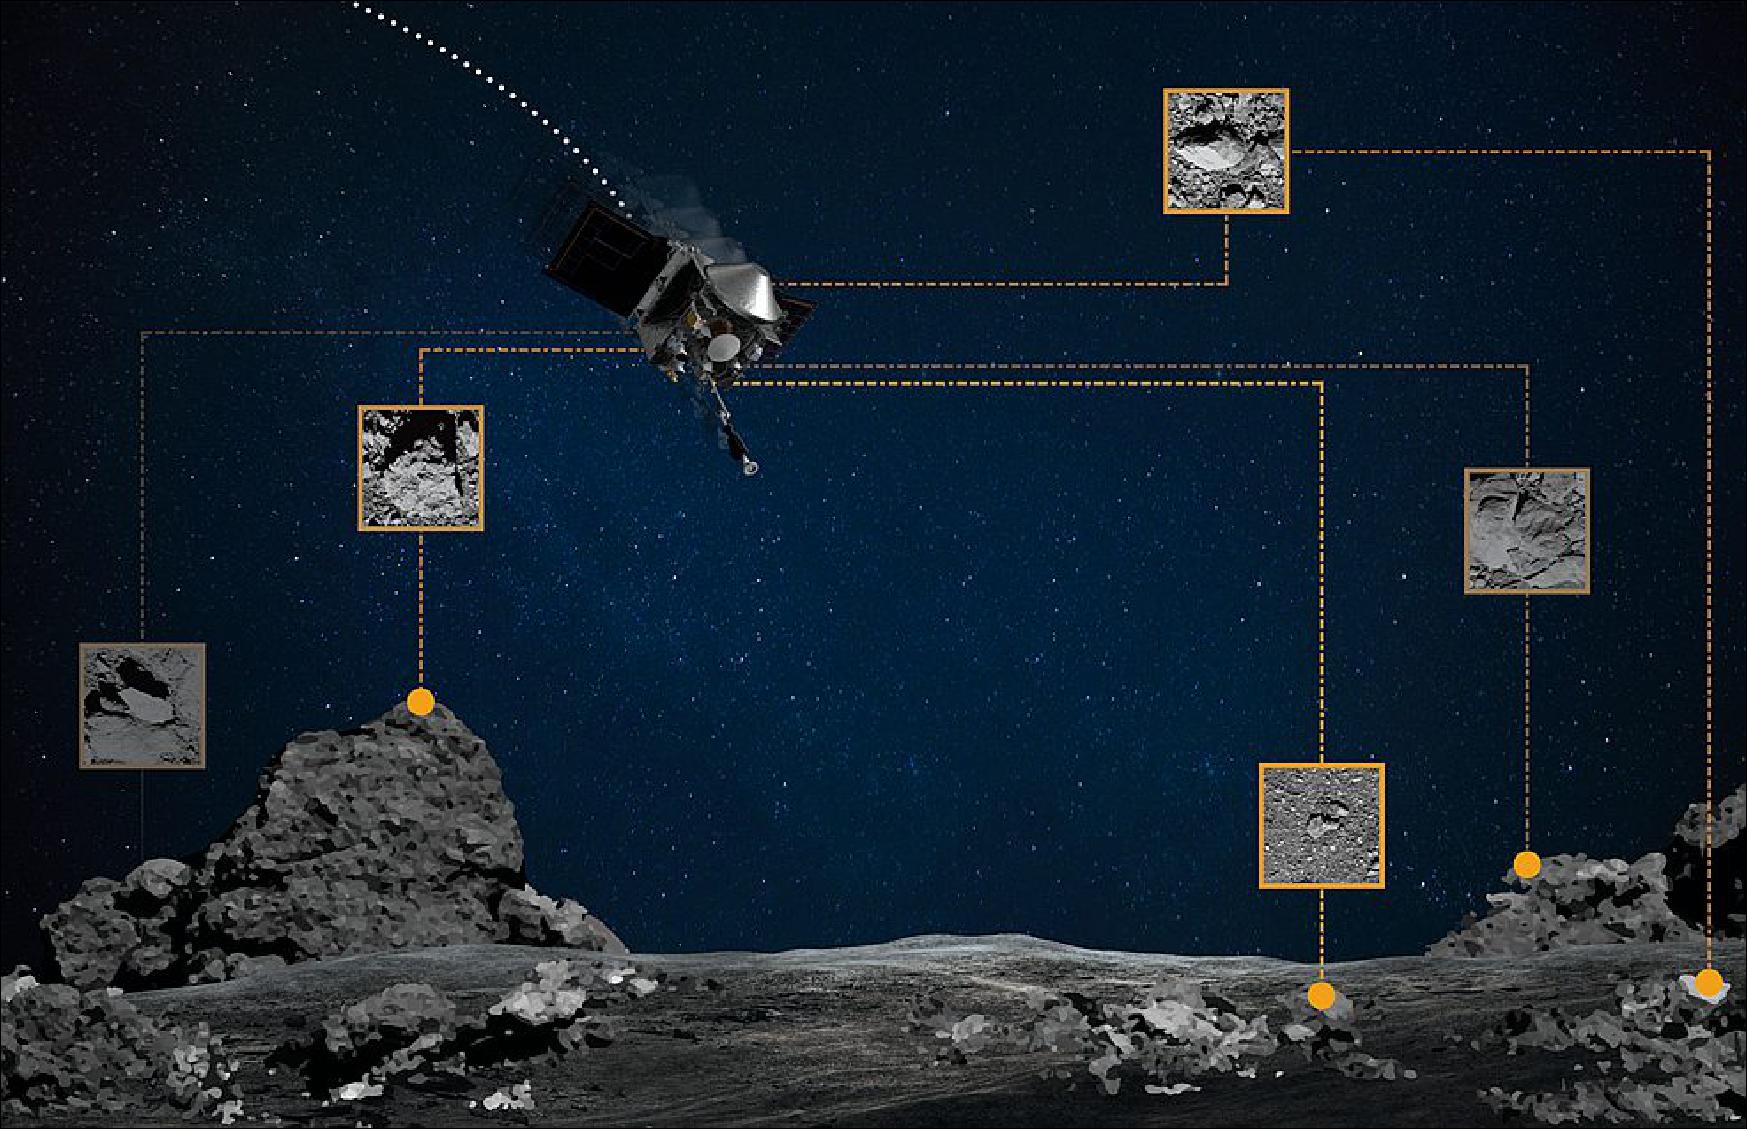 Figure 39: During the sample collection event, NFT will guide NASA’s OSIRIS-REx spacecraft to asteroid Bennu’s surface. The spacecraft takes real-time images of the asteroid’s surface features as it descends, and then compares these images with an onboard image catalog. The spacecraft then uses these geographical markers to orient itself and accurately target the touchdown site (image credit: NASA/Goddard/University of Arizona)